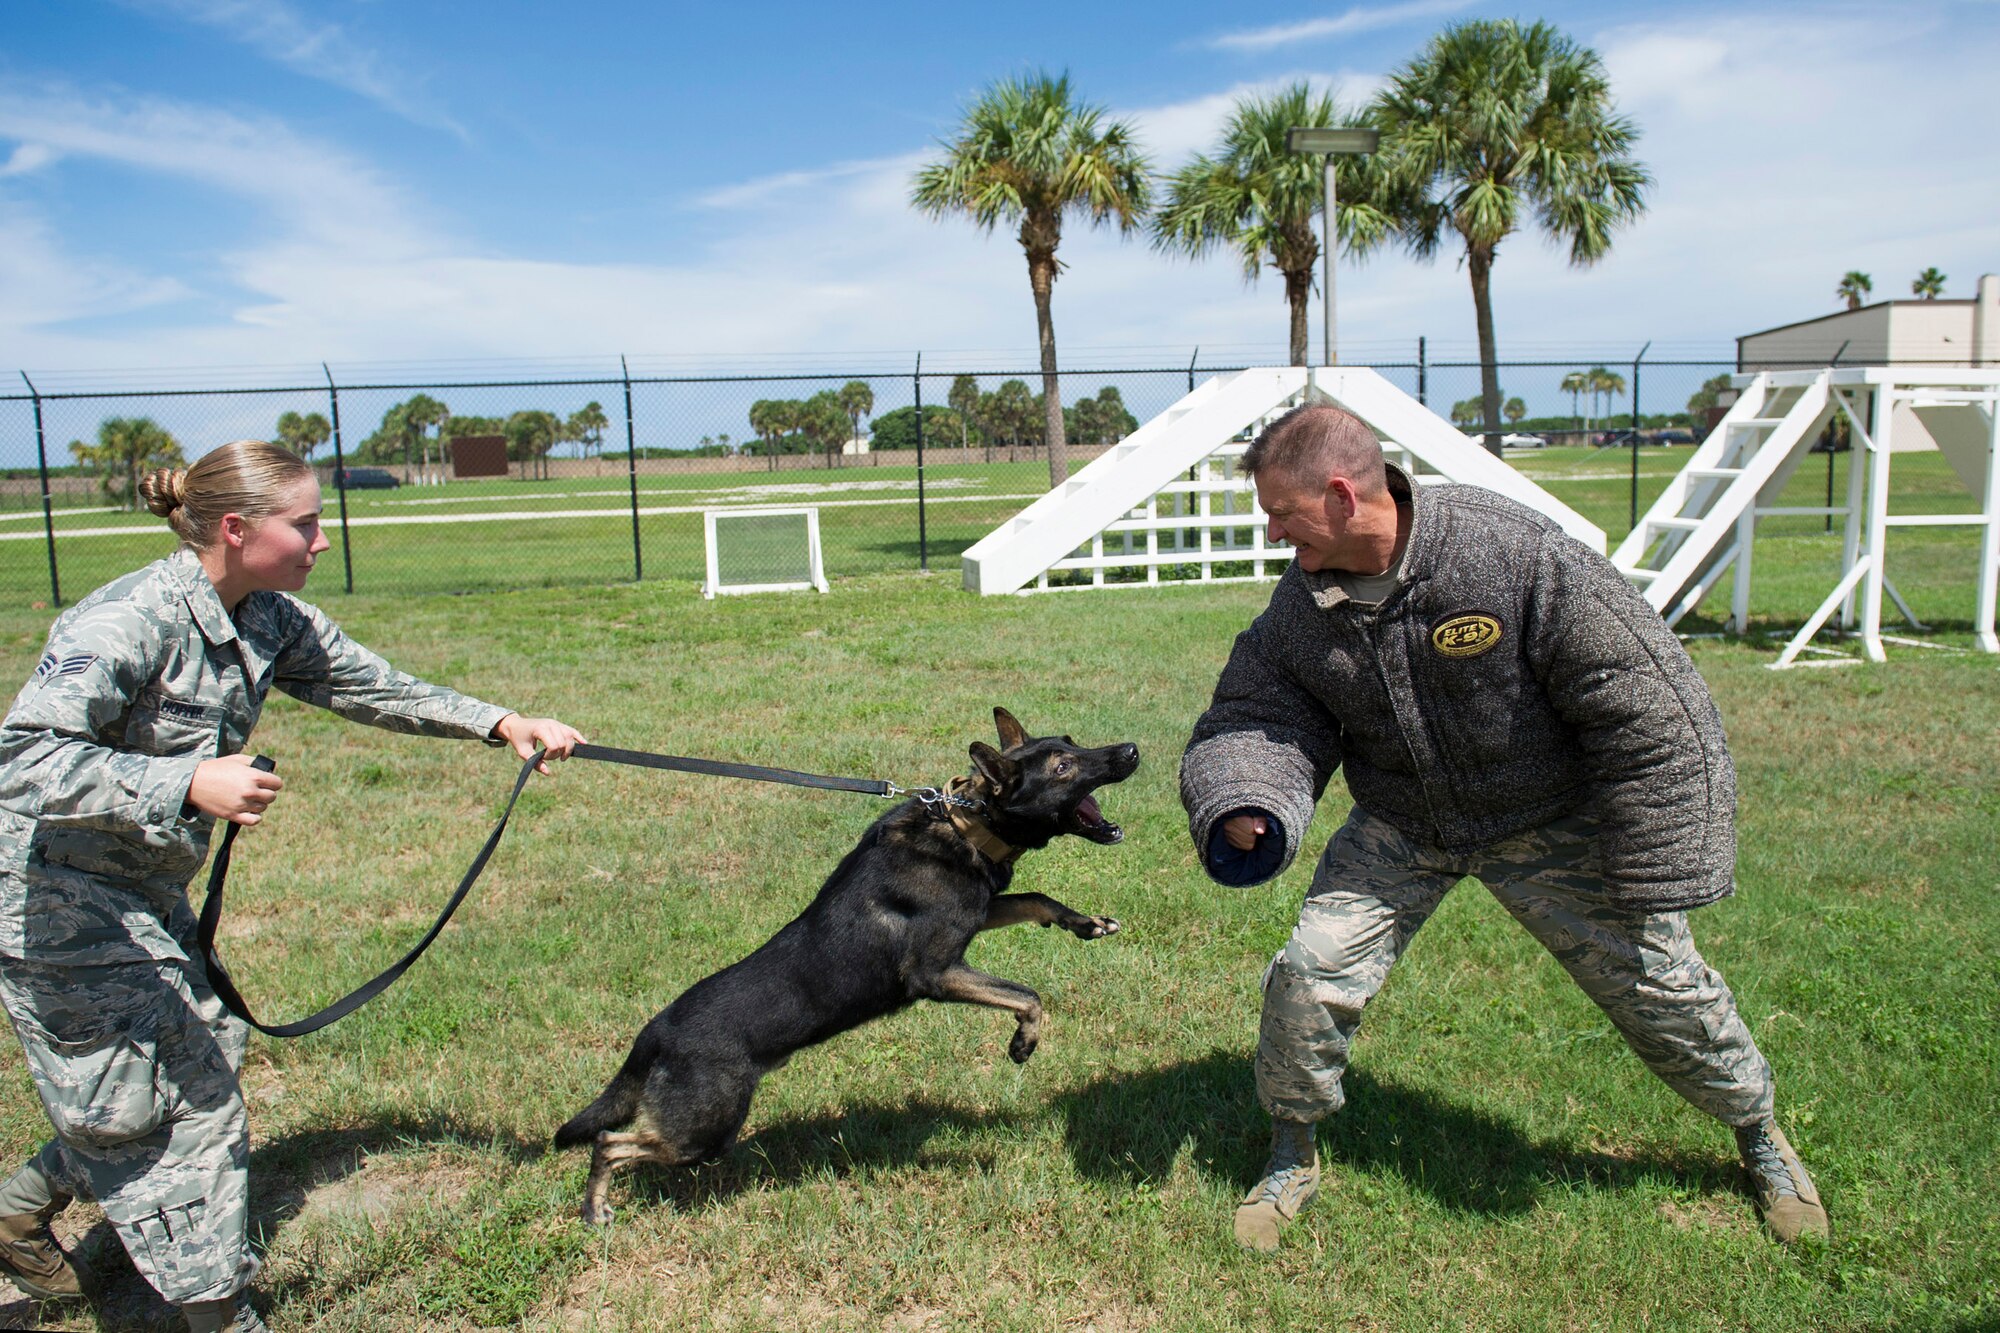 Senior Airman Frances Hopfer, 45th Security Forces Squadron Military Working Dog handler, and Digo, MWD, participate in a patrol attack demonstration with Brig. Gen. Wayne Monteith, 45th Space Wing commander, Aug. 20, 2015, at Patrick Air Force Base, Fla. The new commander met with the personnel of the 45th SFS and was introduced to the facilities they use in day-to-day operations. (U.S. Air Force photo by Matthew Jurgens/Released) 